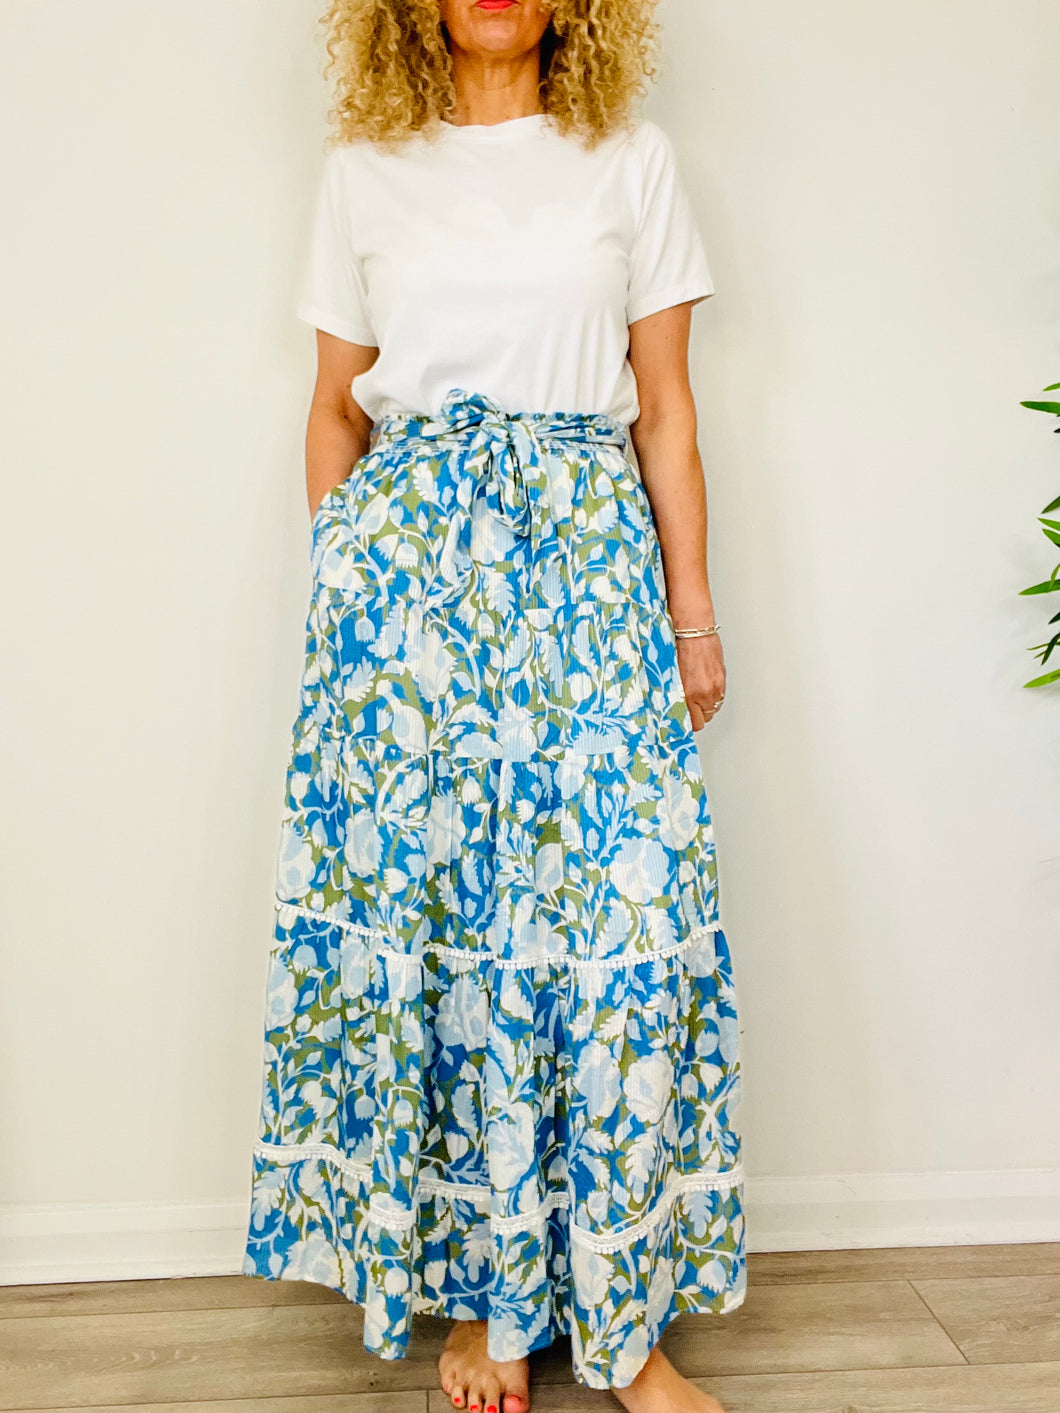 Patterned Maxi Skirt - Size 10